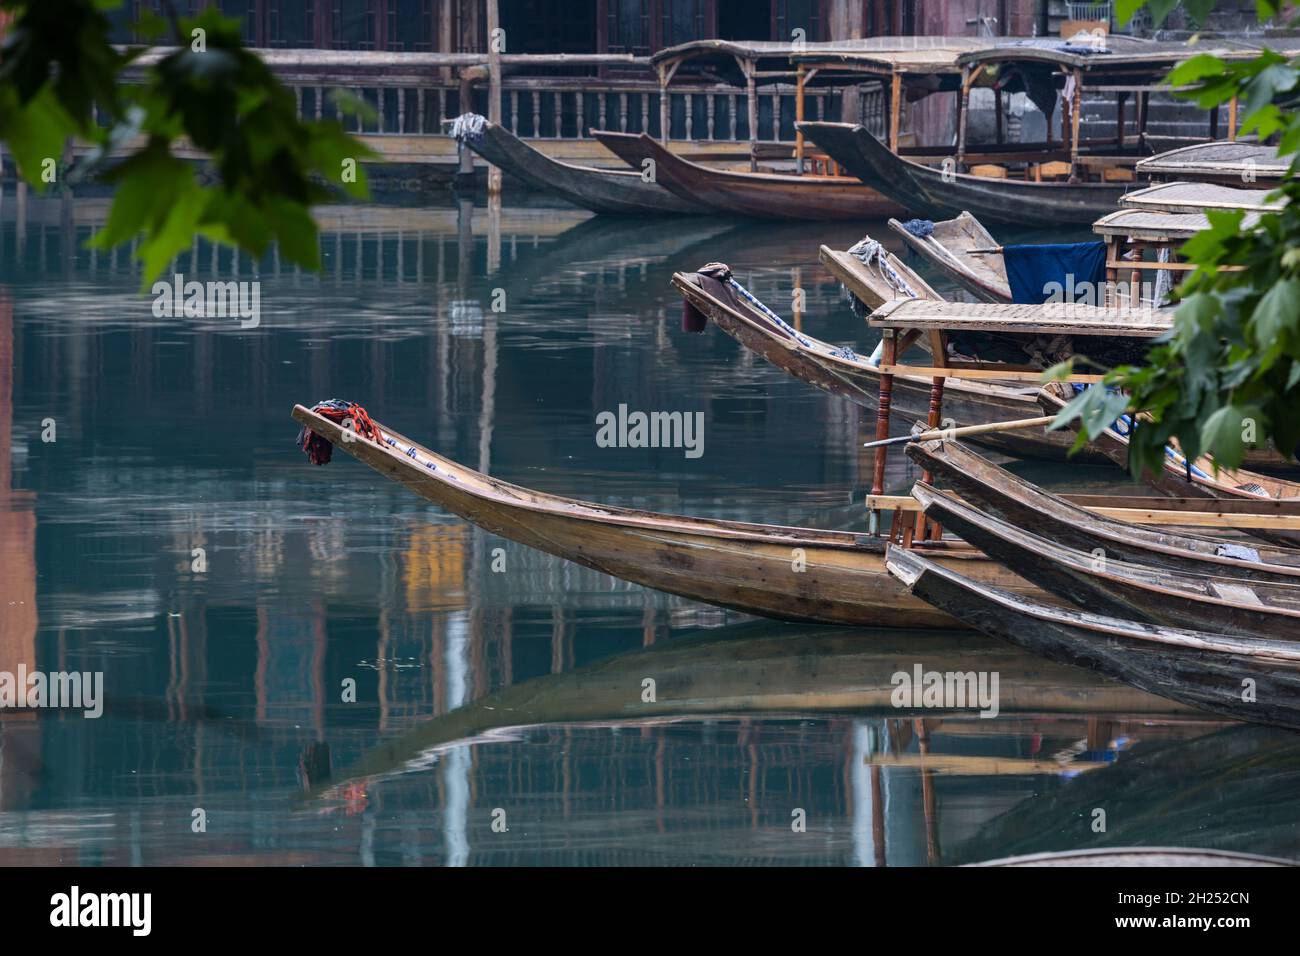 Covered tour boats reflected in the calm water of the Tuojiang River in Fenghuang, China. Stock Photo